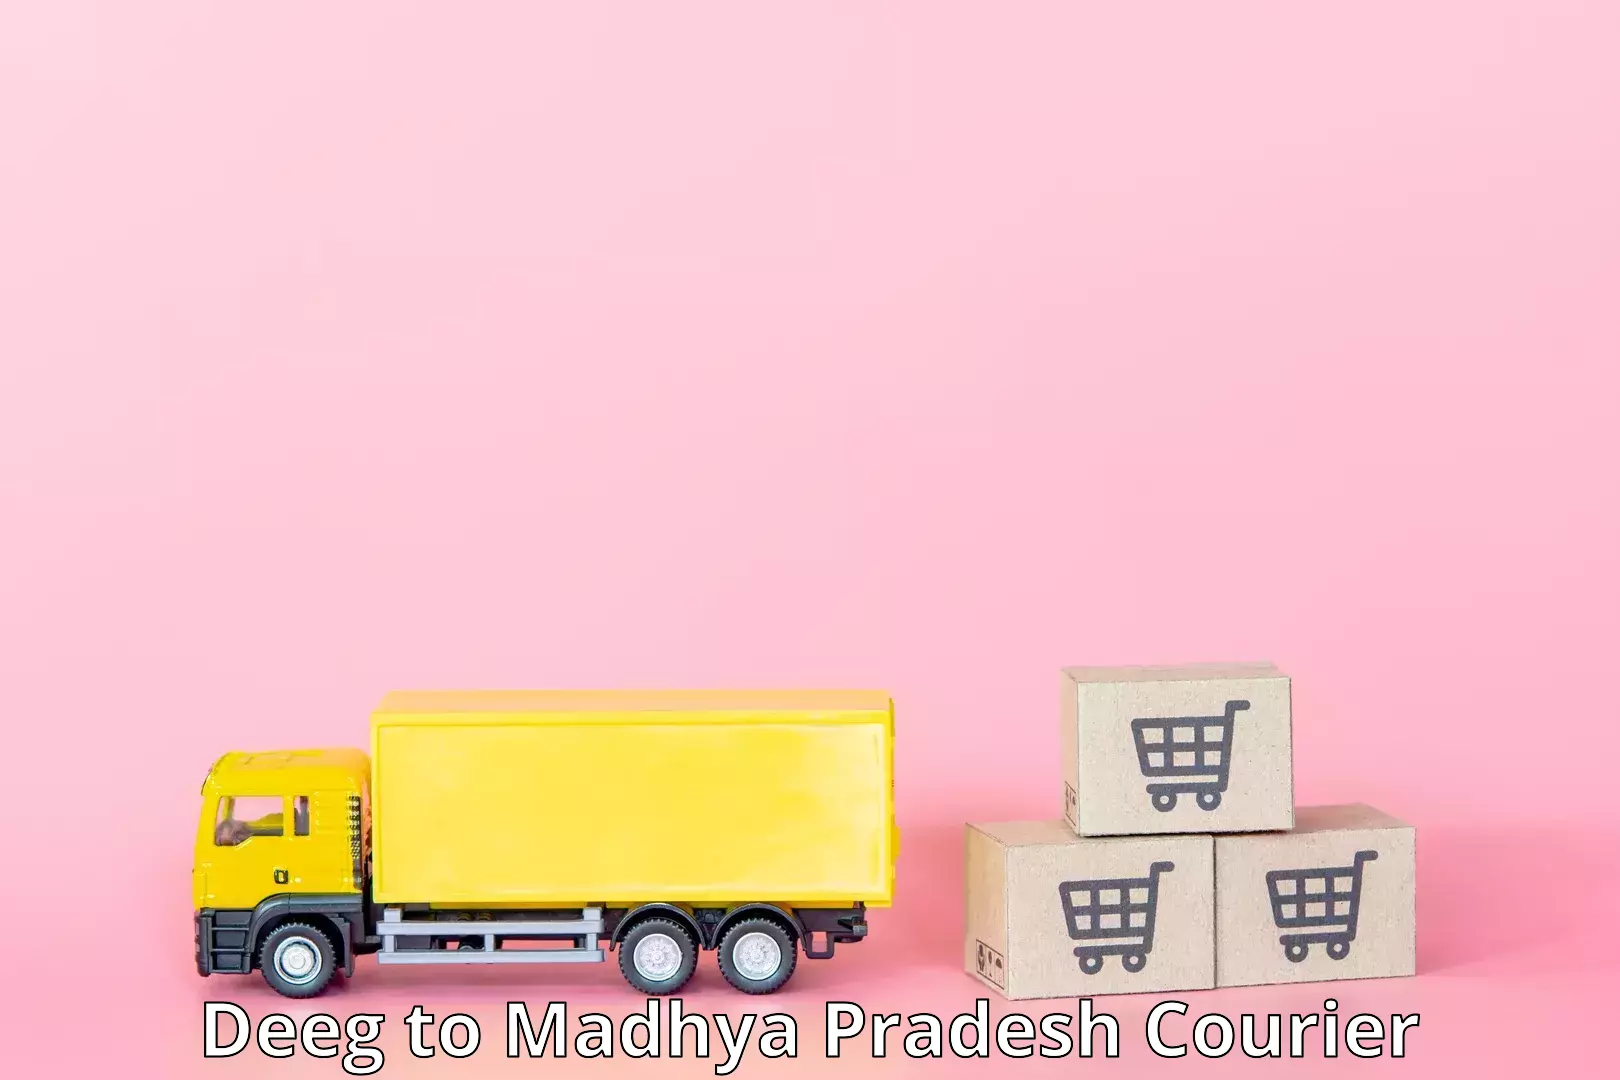 Professional courier services Deeg to Madhya Pradesh